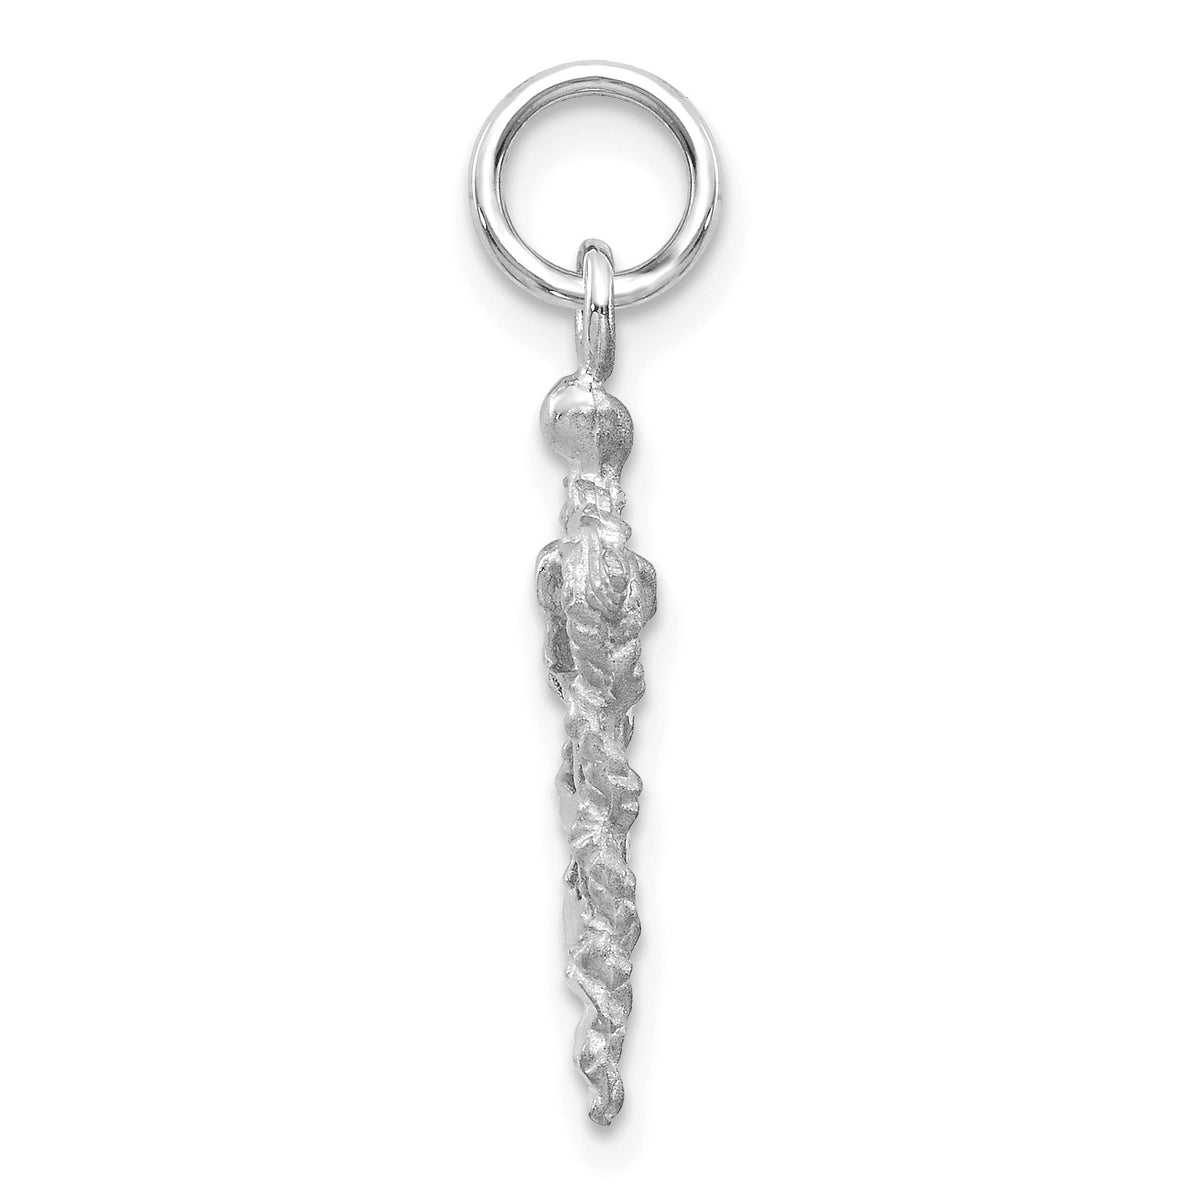 Alternate view of the 14k White Gold 3D Caduceus Charm or Pendant, 11 x 26mm by The Black Bow Jewelry Co.